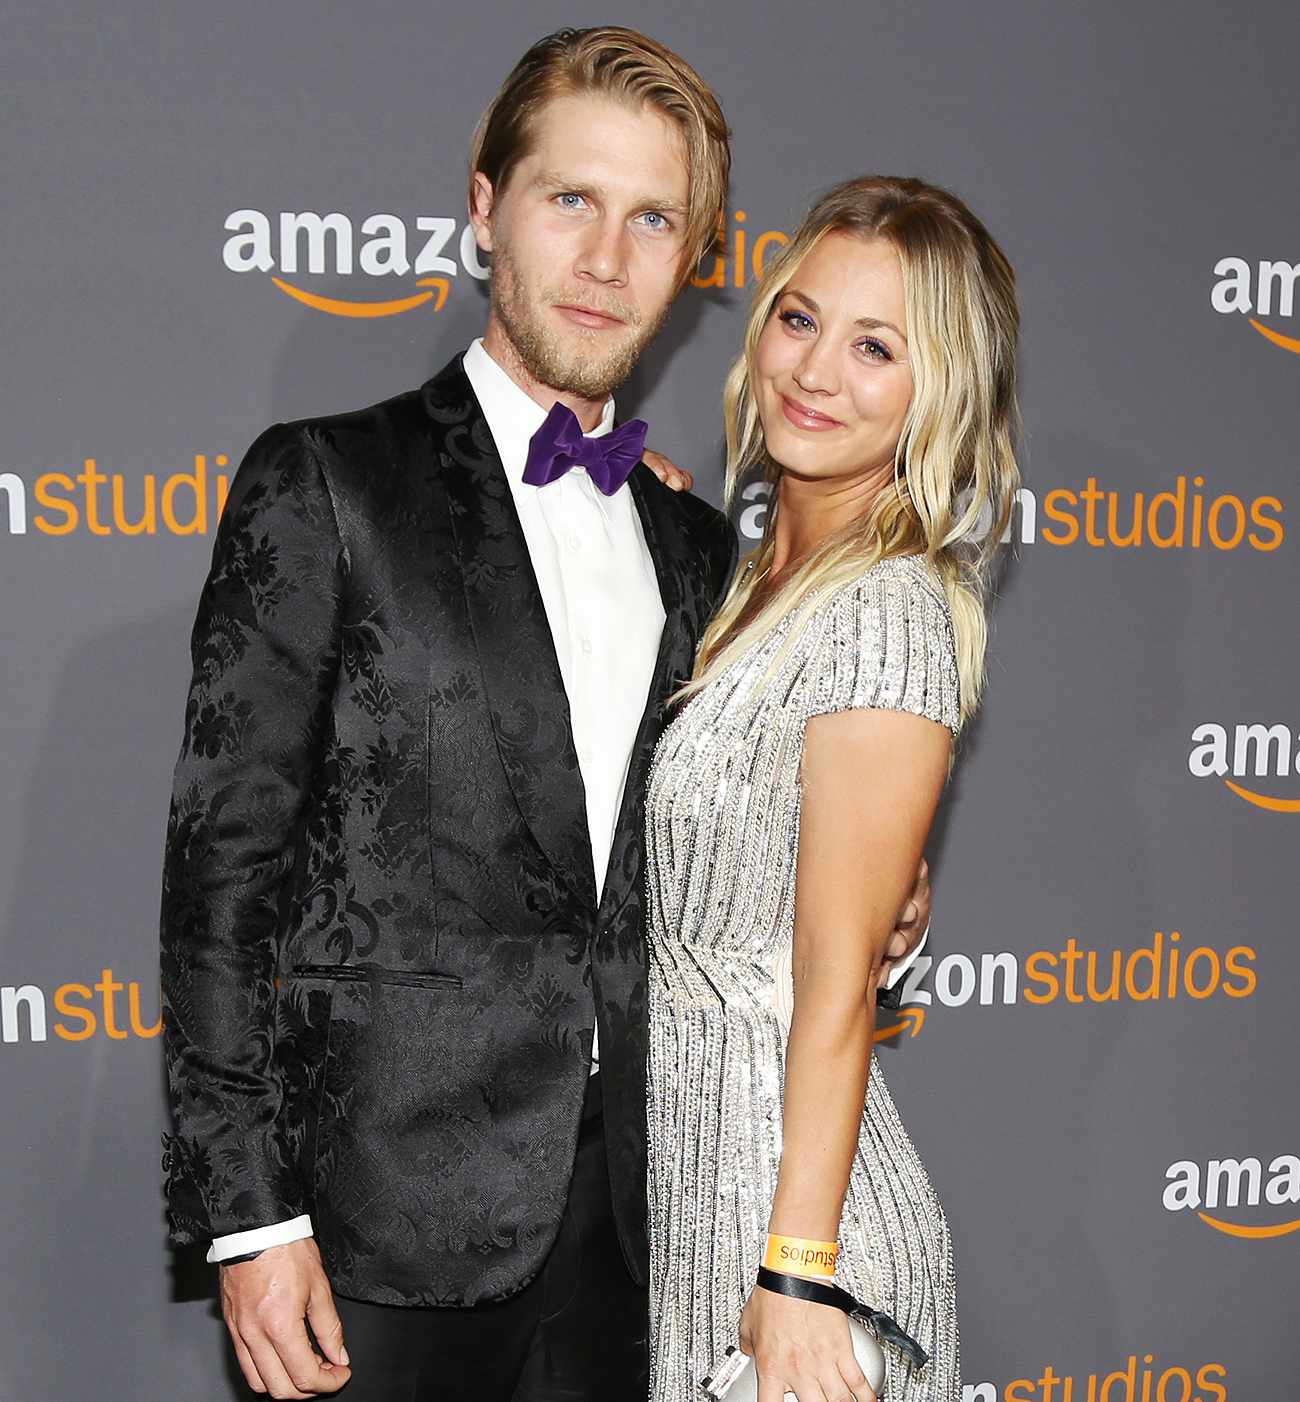 Kaley Cuoco Doesn T Depend On Husband Karl Cook Financially People Com Kaley cuoco & husband karl cook move in together nearly 2 years after getting married. kaley cuoco doesn t depend on husband karl cook financially people com